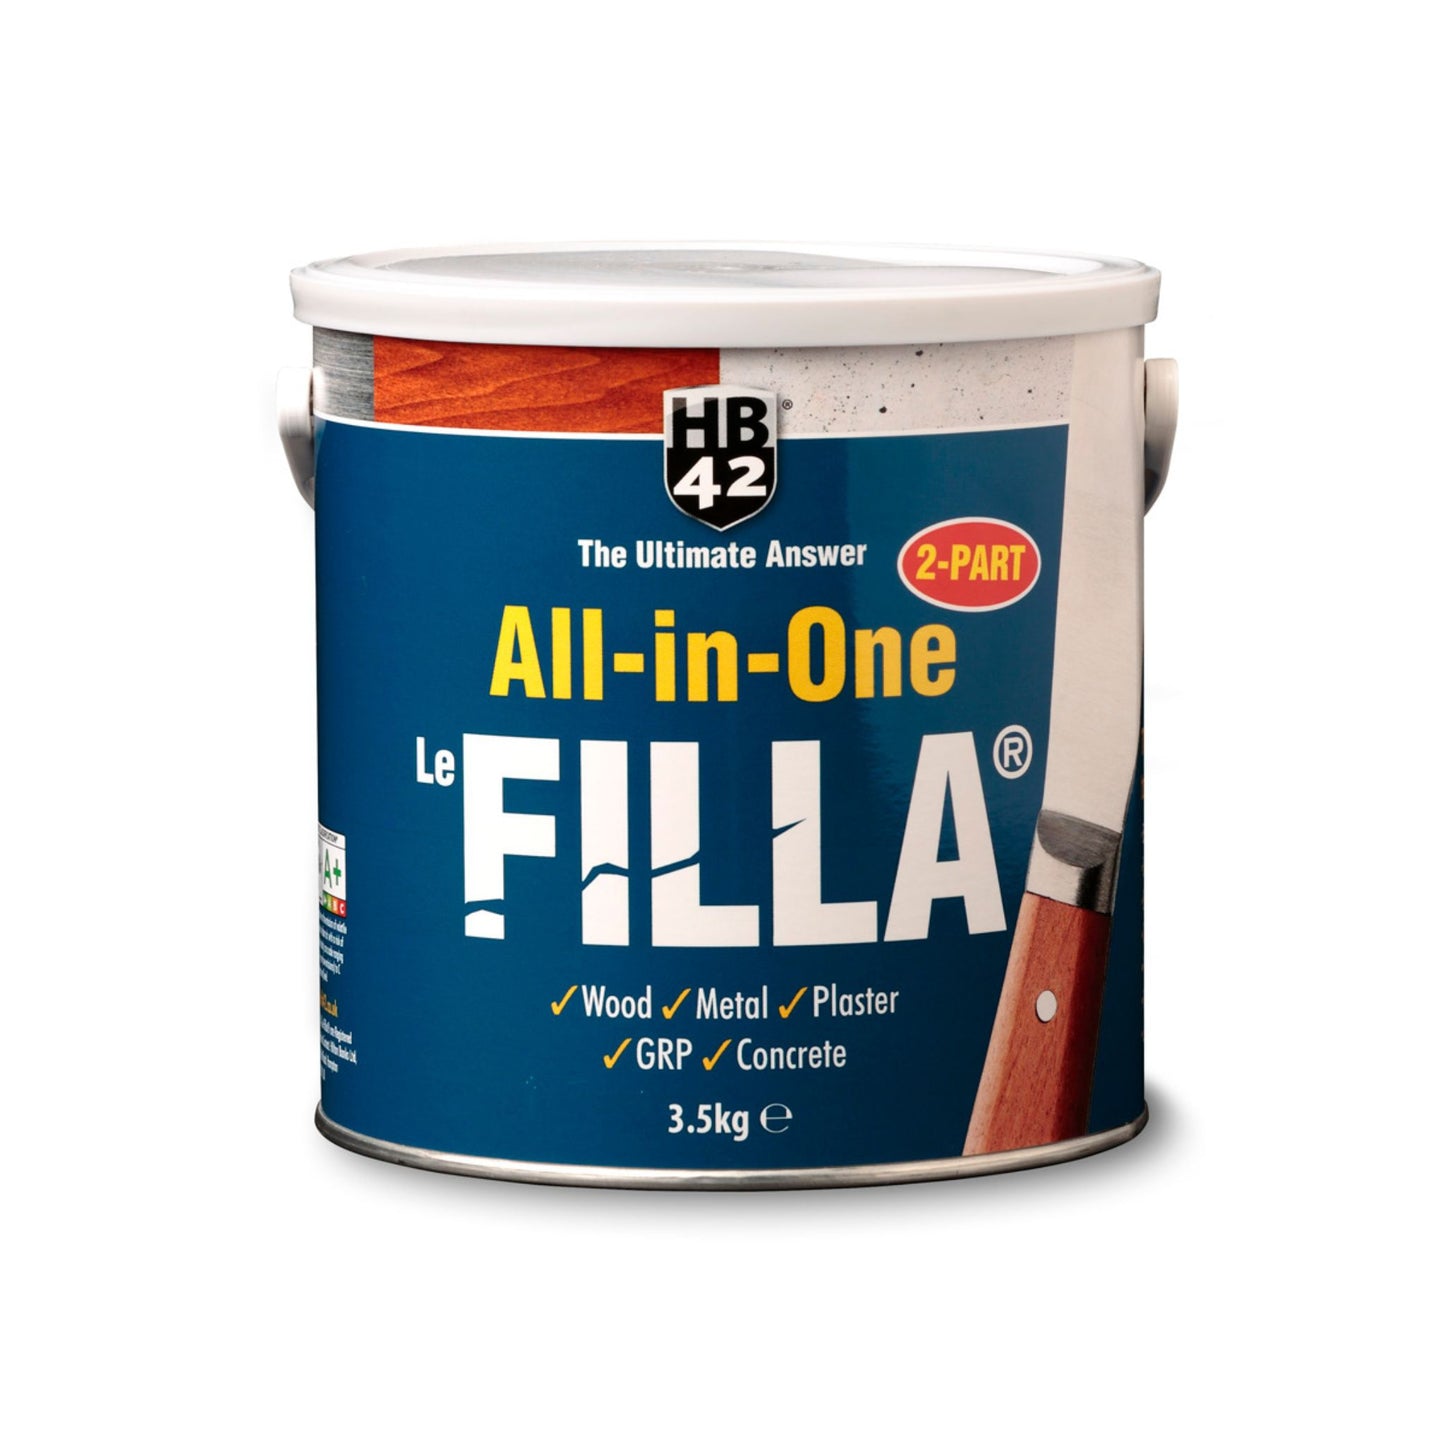 HB42 Ultimate All-in-One Le Filla 3.5Kg